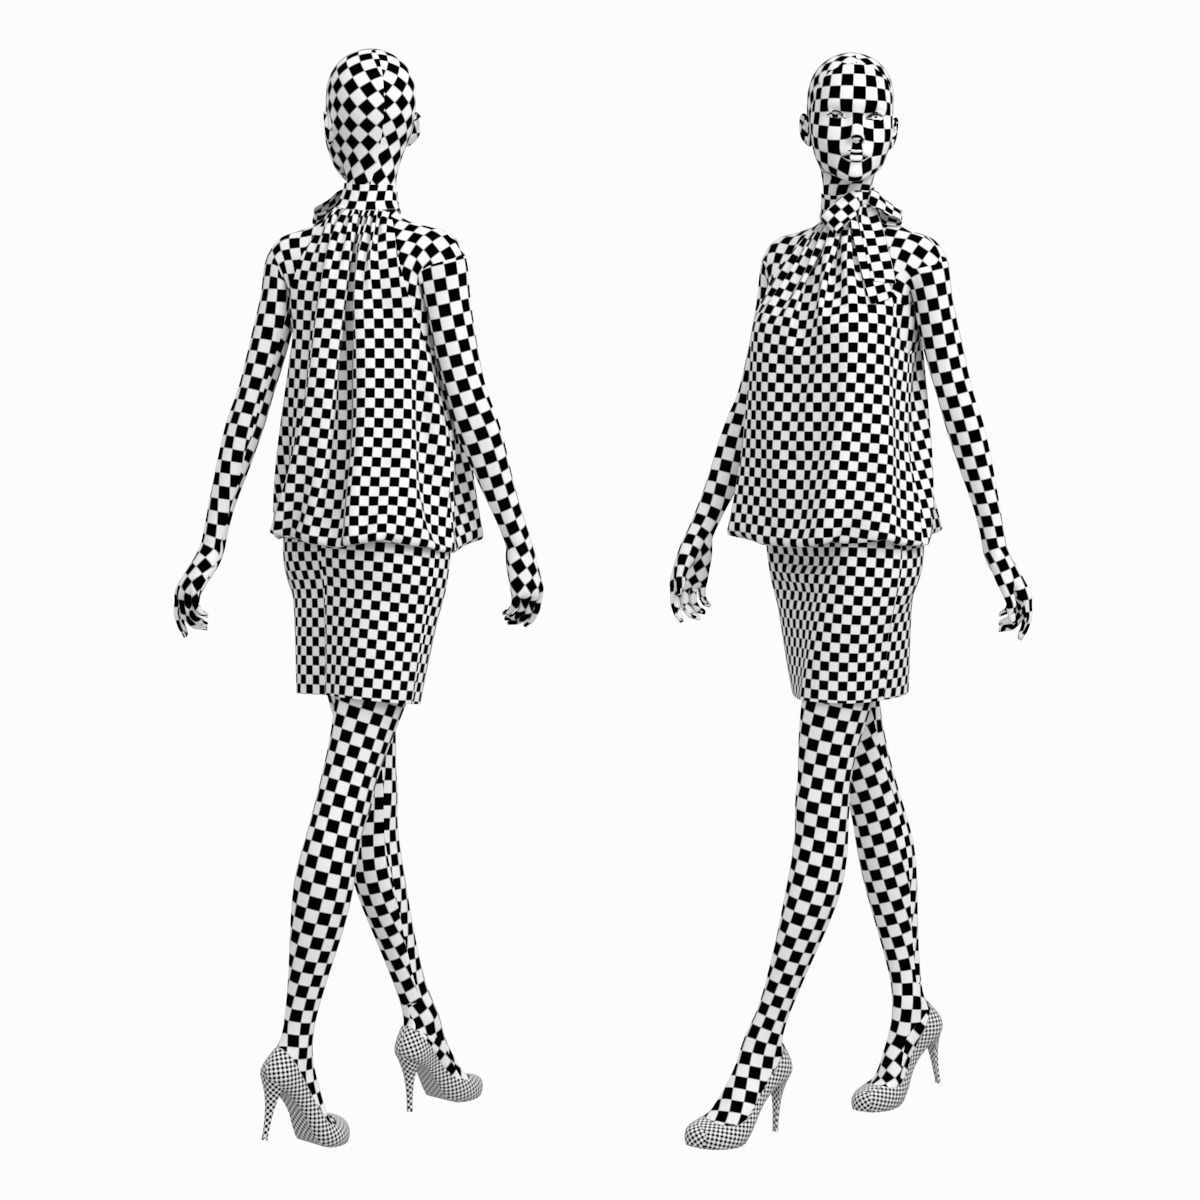 Fashion Mannequin Drawing at GetDrawings Free download